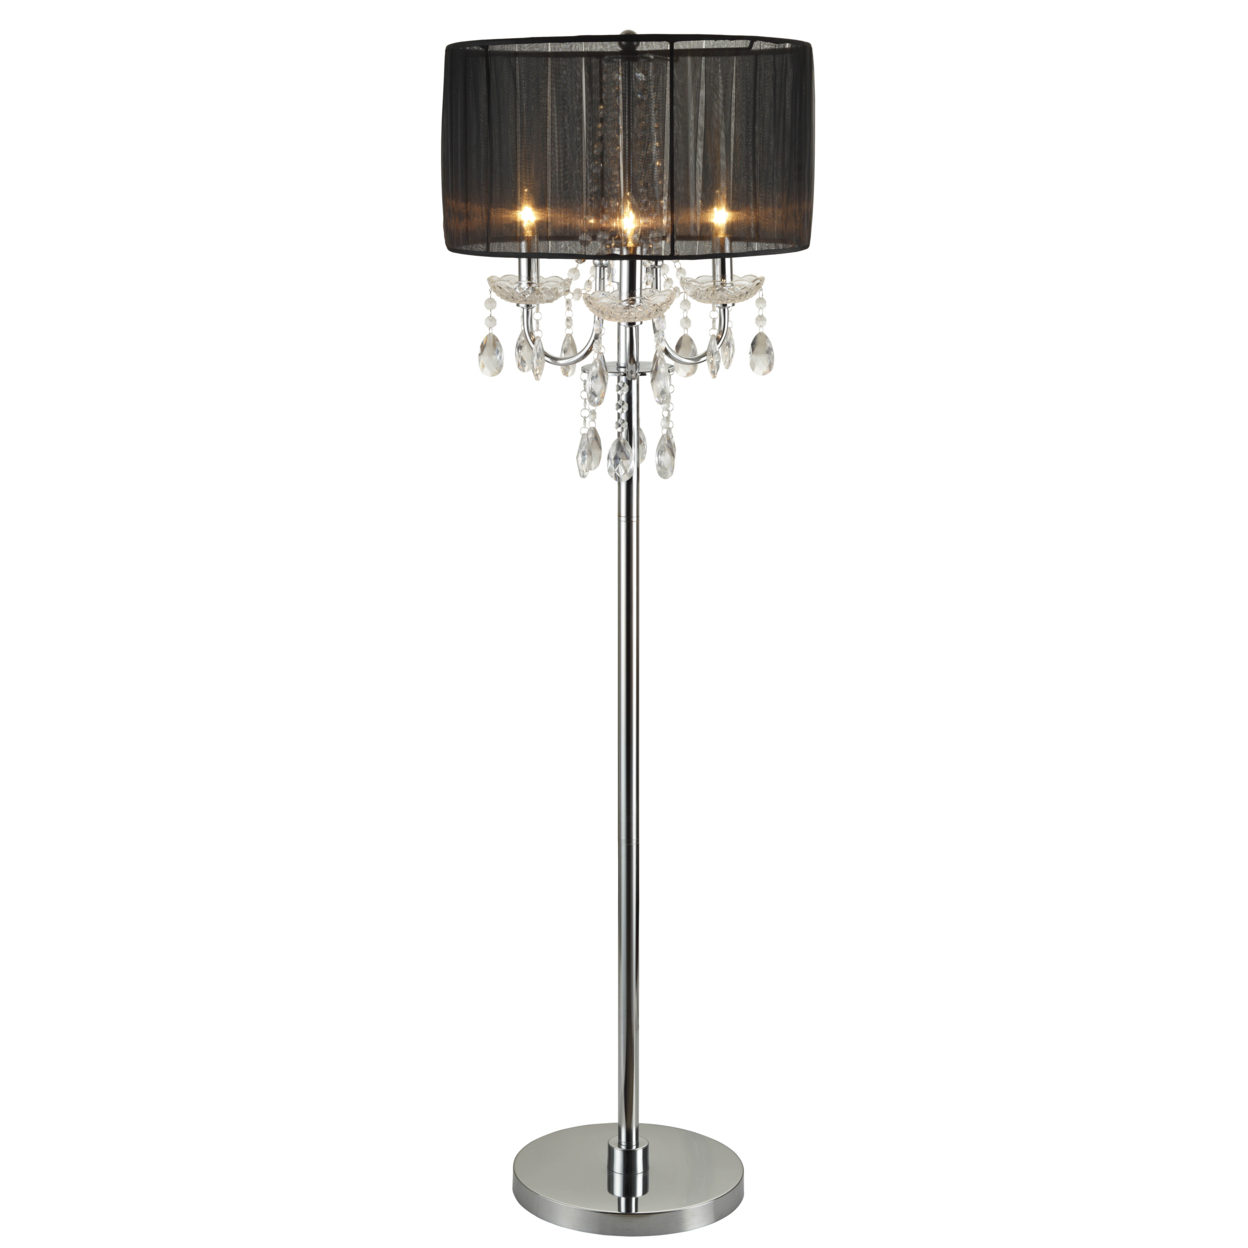 Round Fabric Wrapped Floor Lamp With Crystal Inlay, Gray And Silver- Saltoro Sherpi